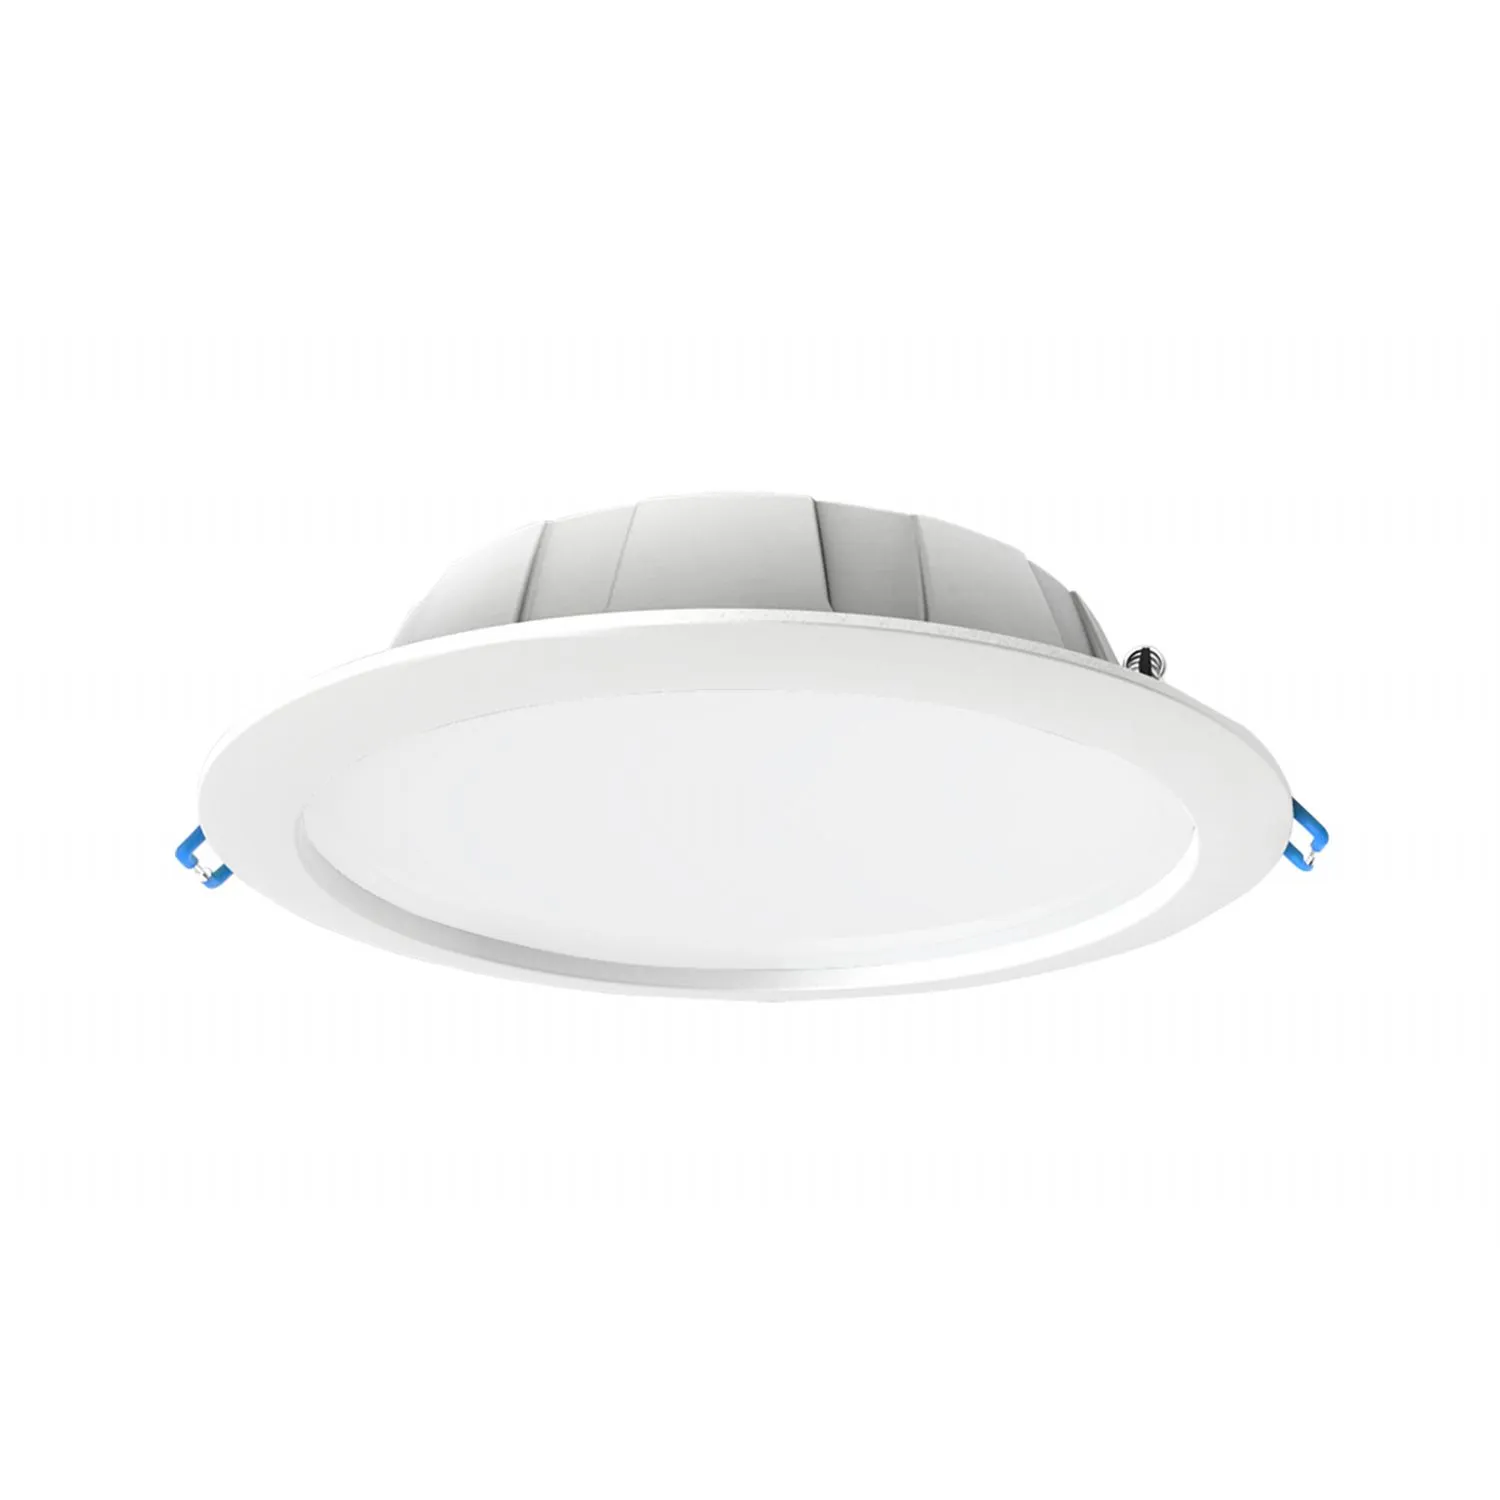 Graciosa Round LED Dimmable Downlight, 15W, 6500K, 1400lm, White,DiaØ18038mm Cut Out 150mm, IP44, Driver Included, 3yrs Warranty